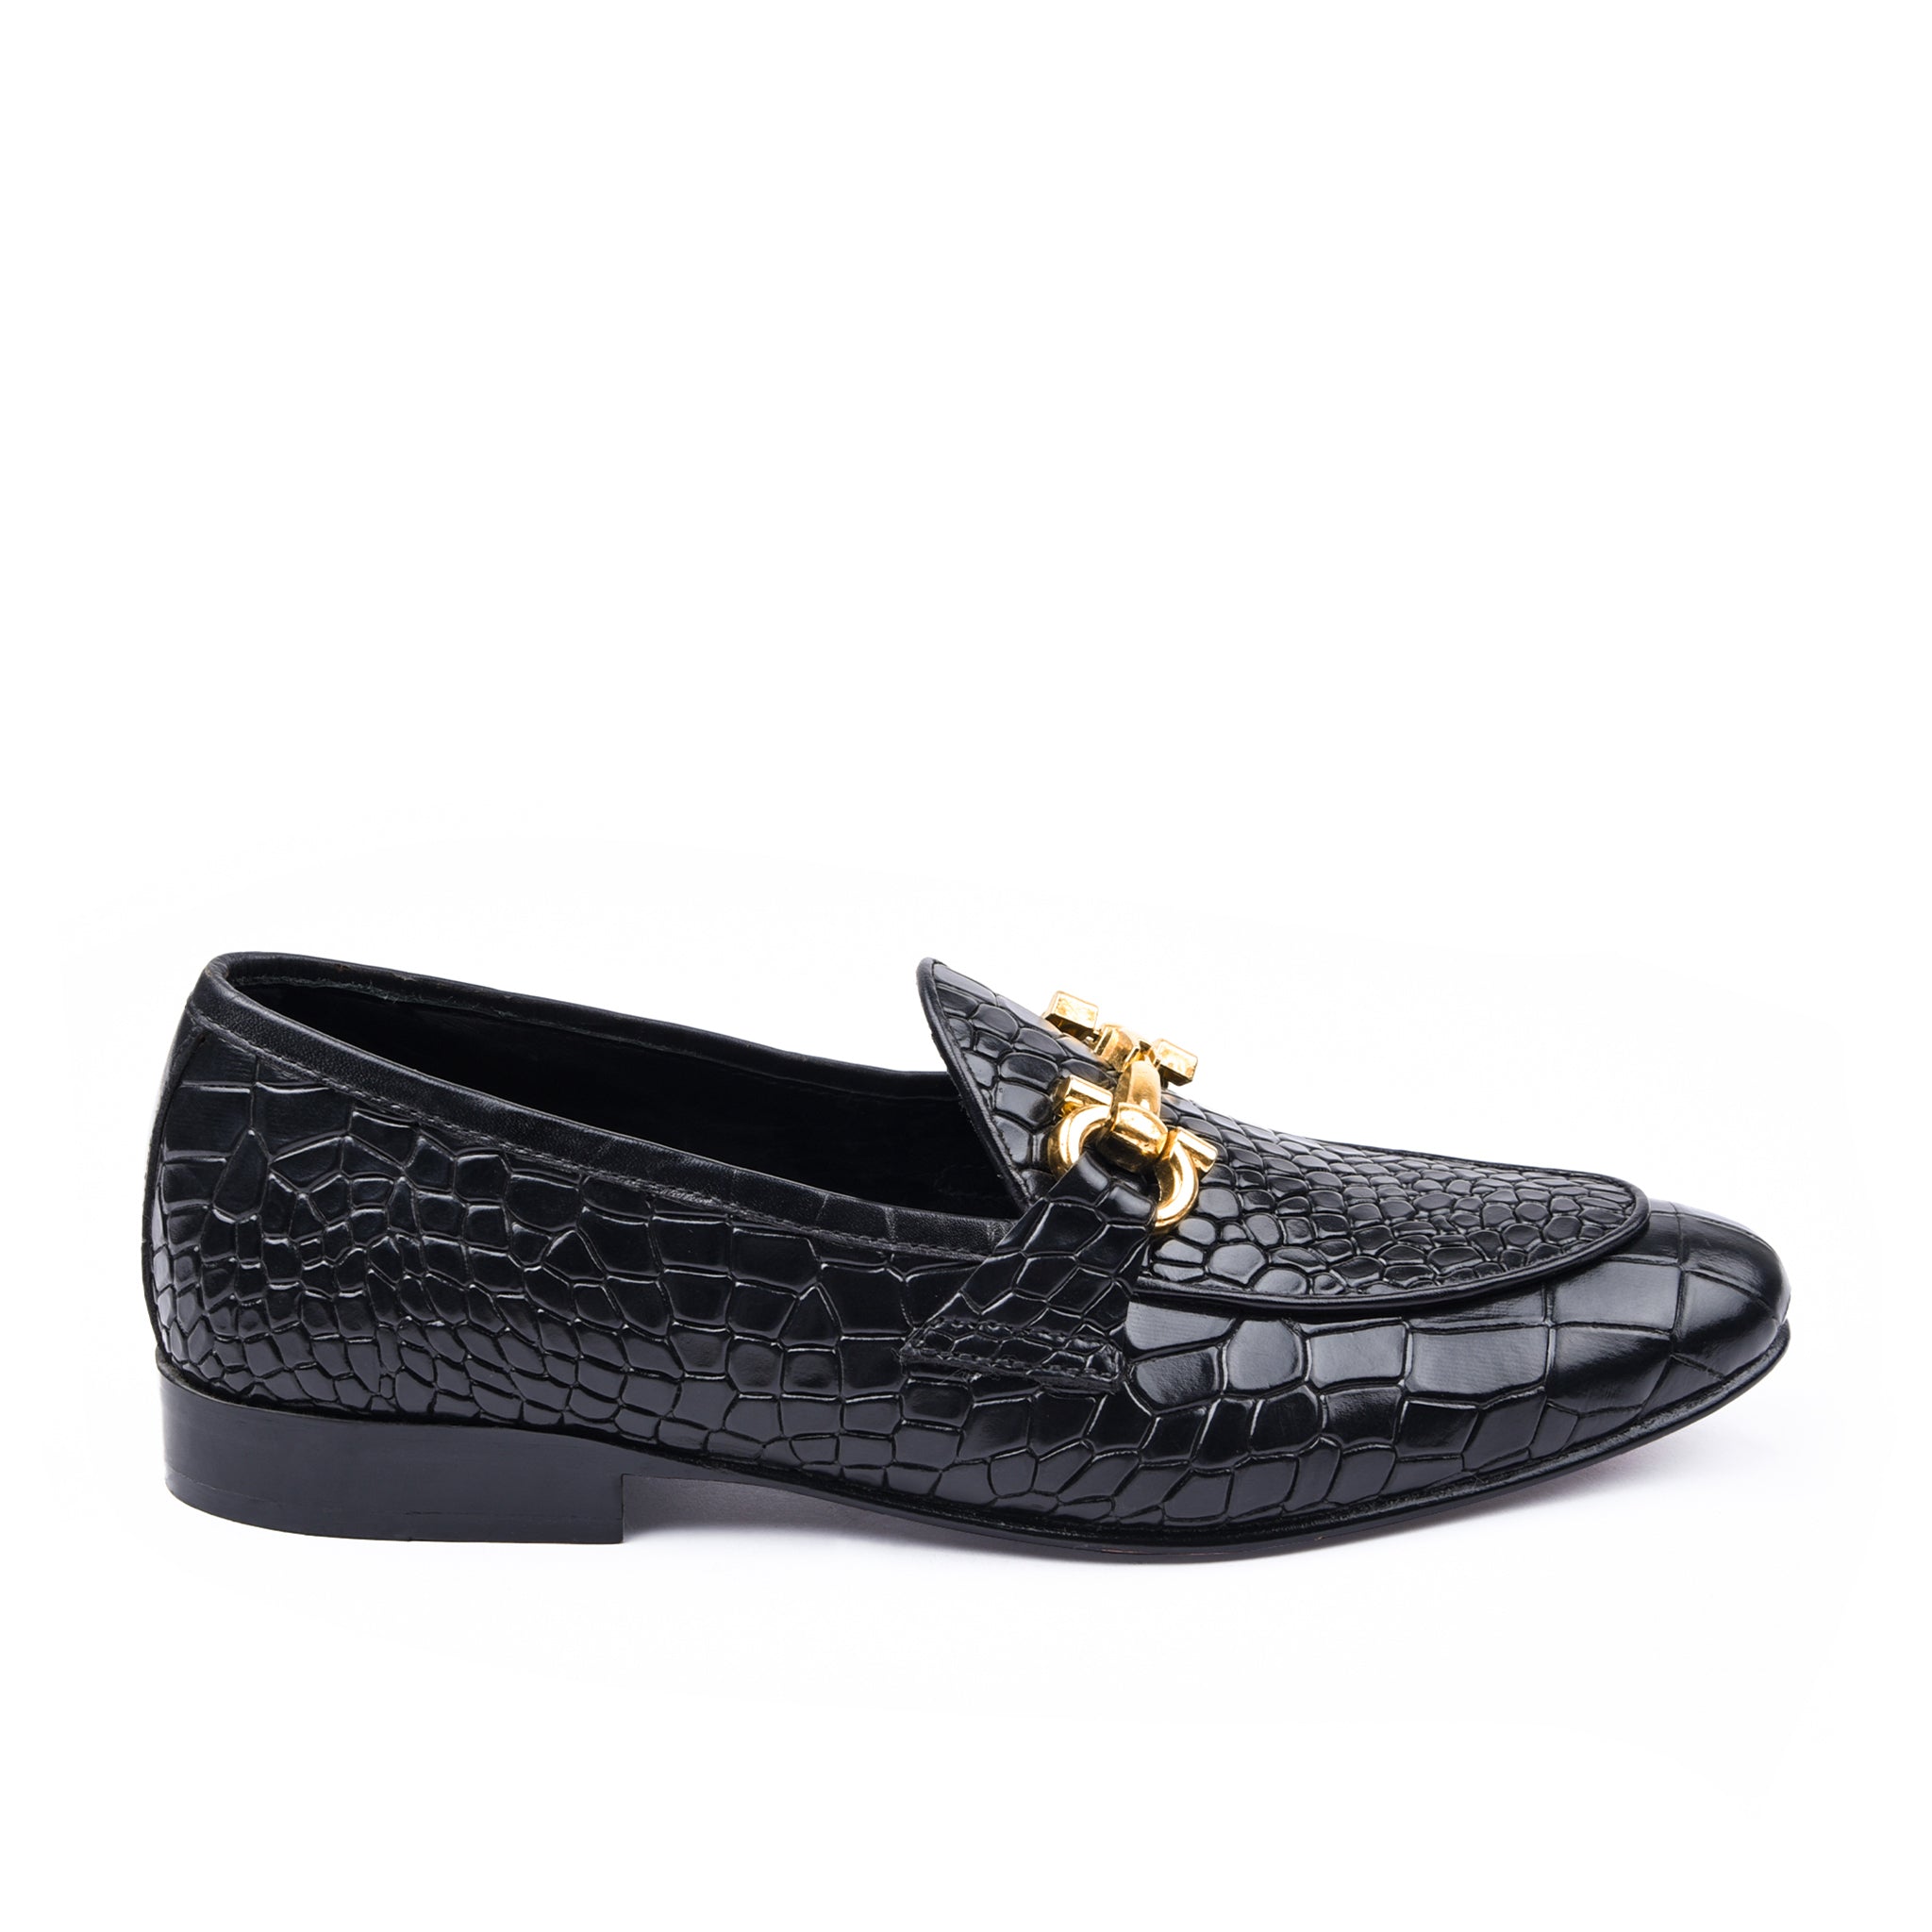 Crocodile Buckle Loafers – The Woodpecker shoes